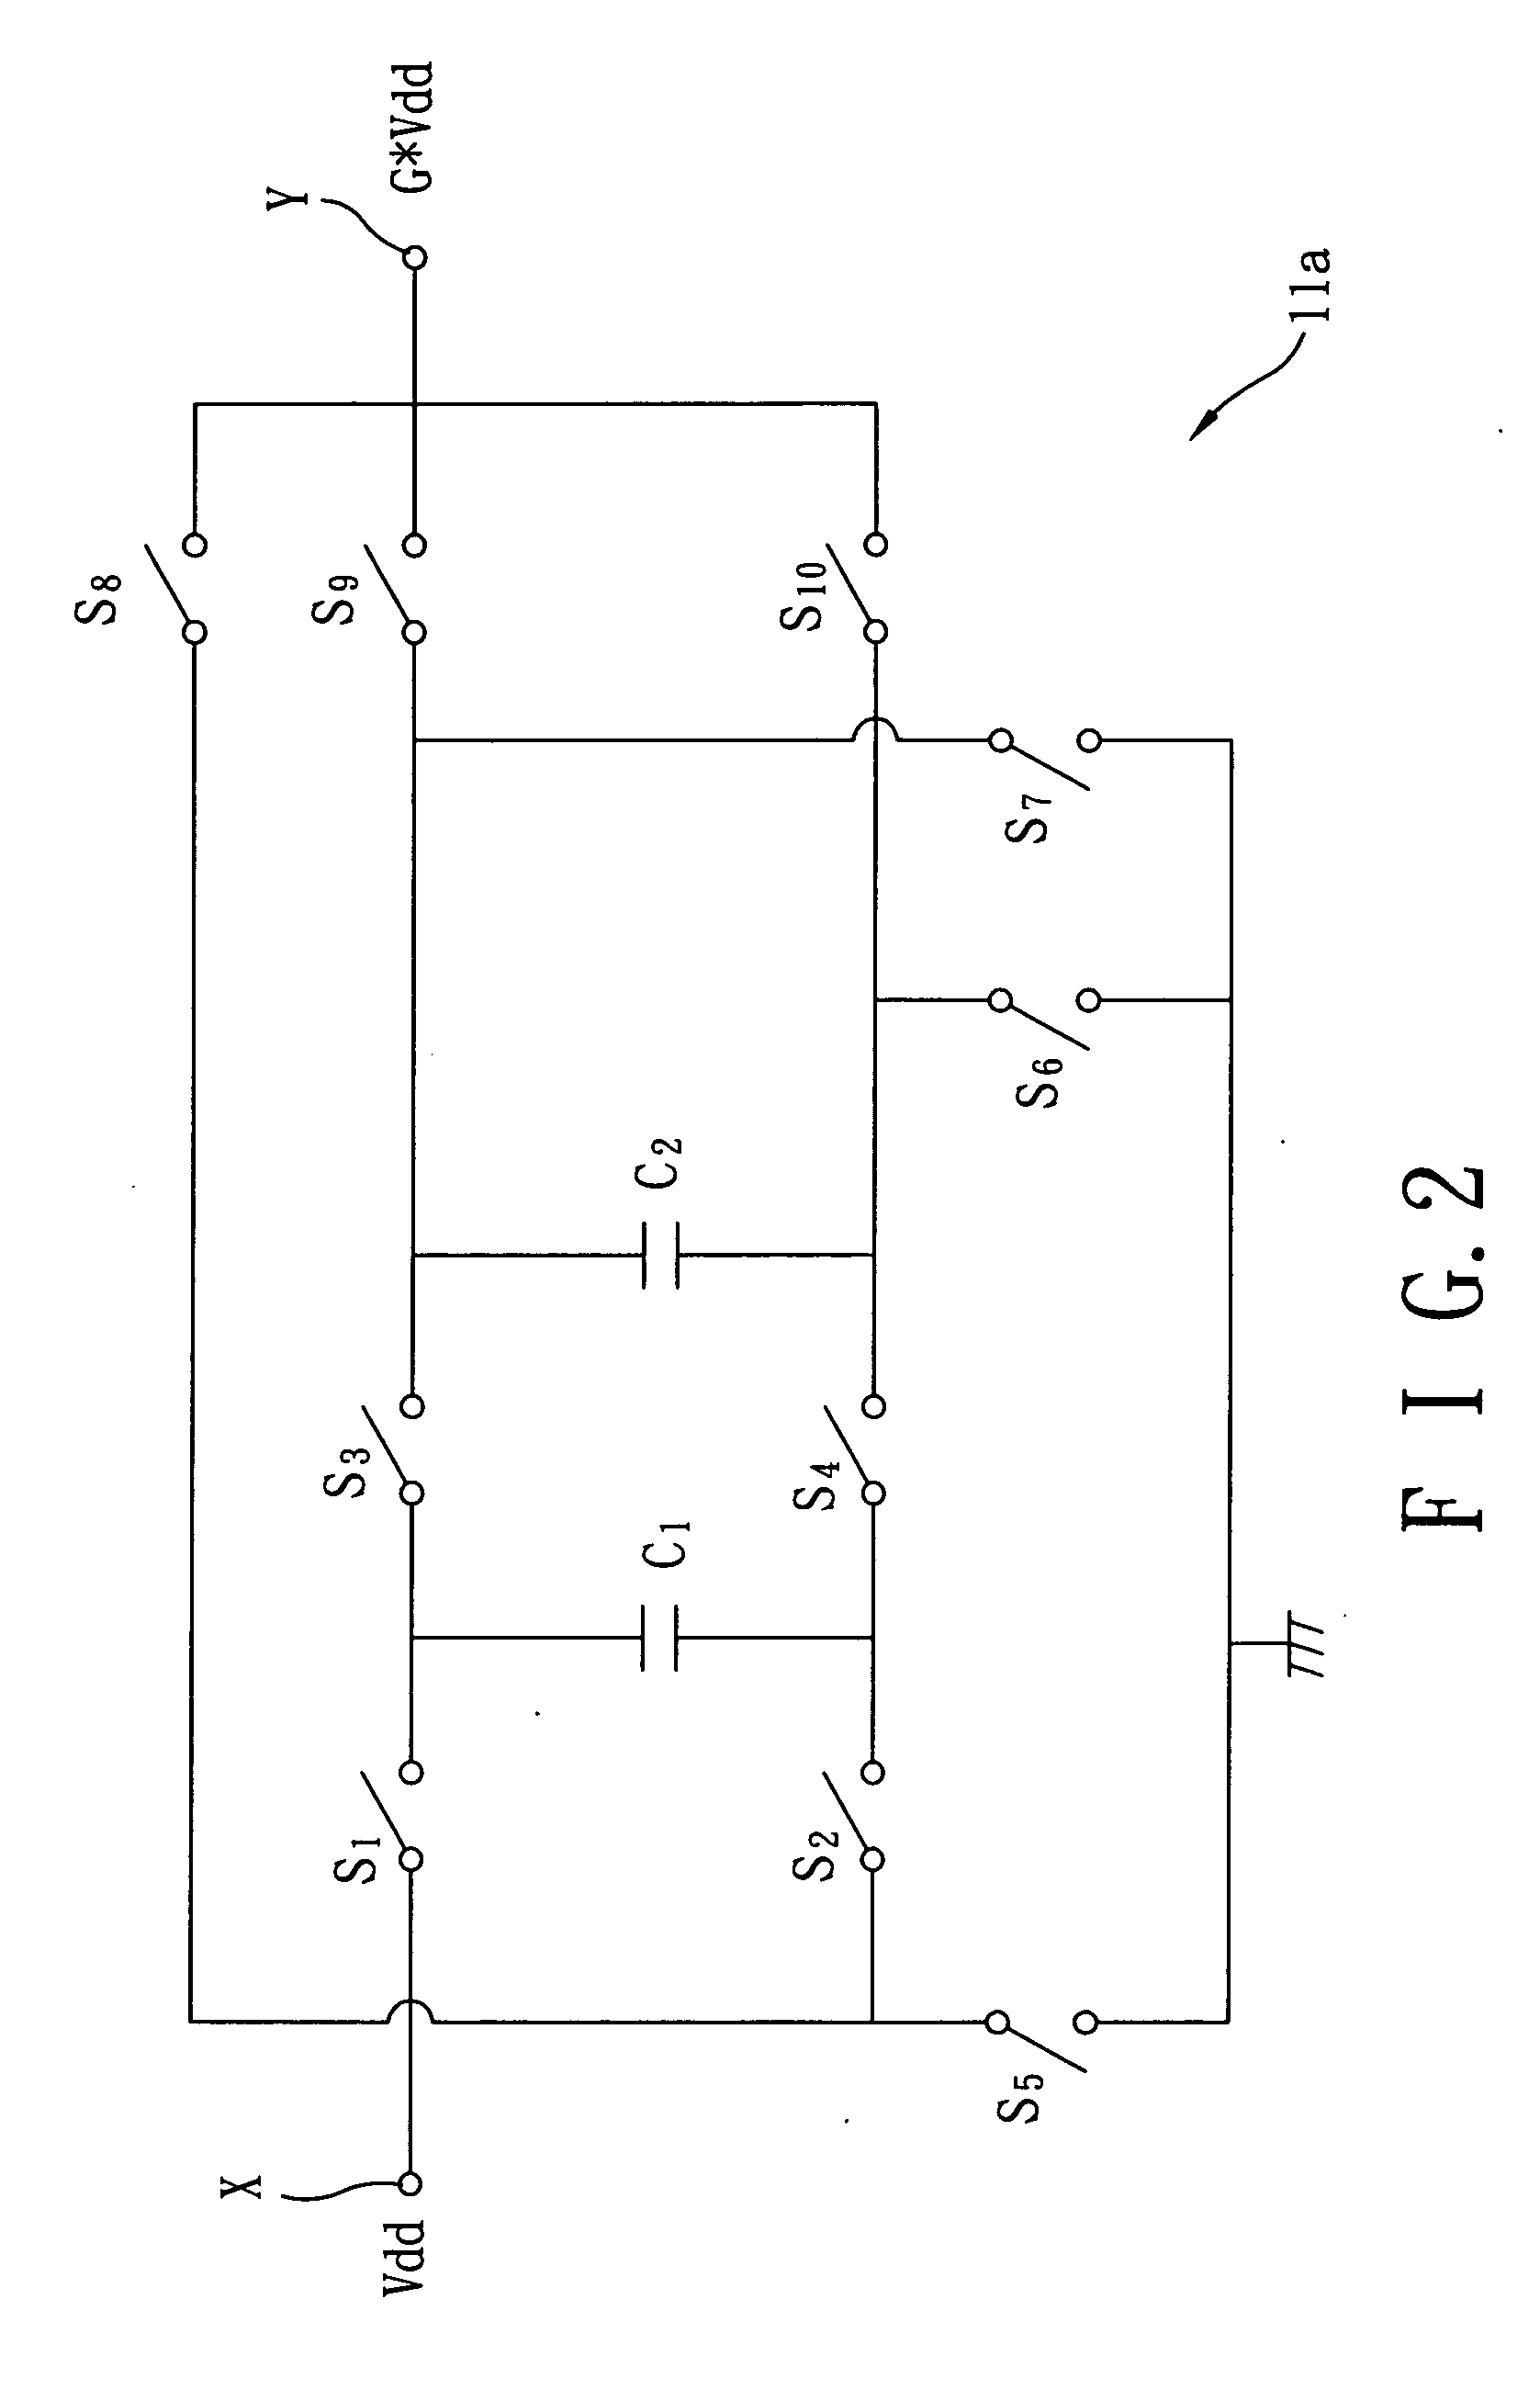 Amplifying circuit with variable supply voltage